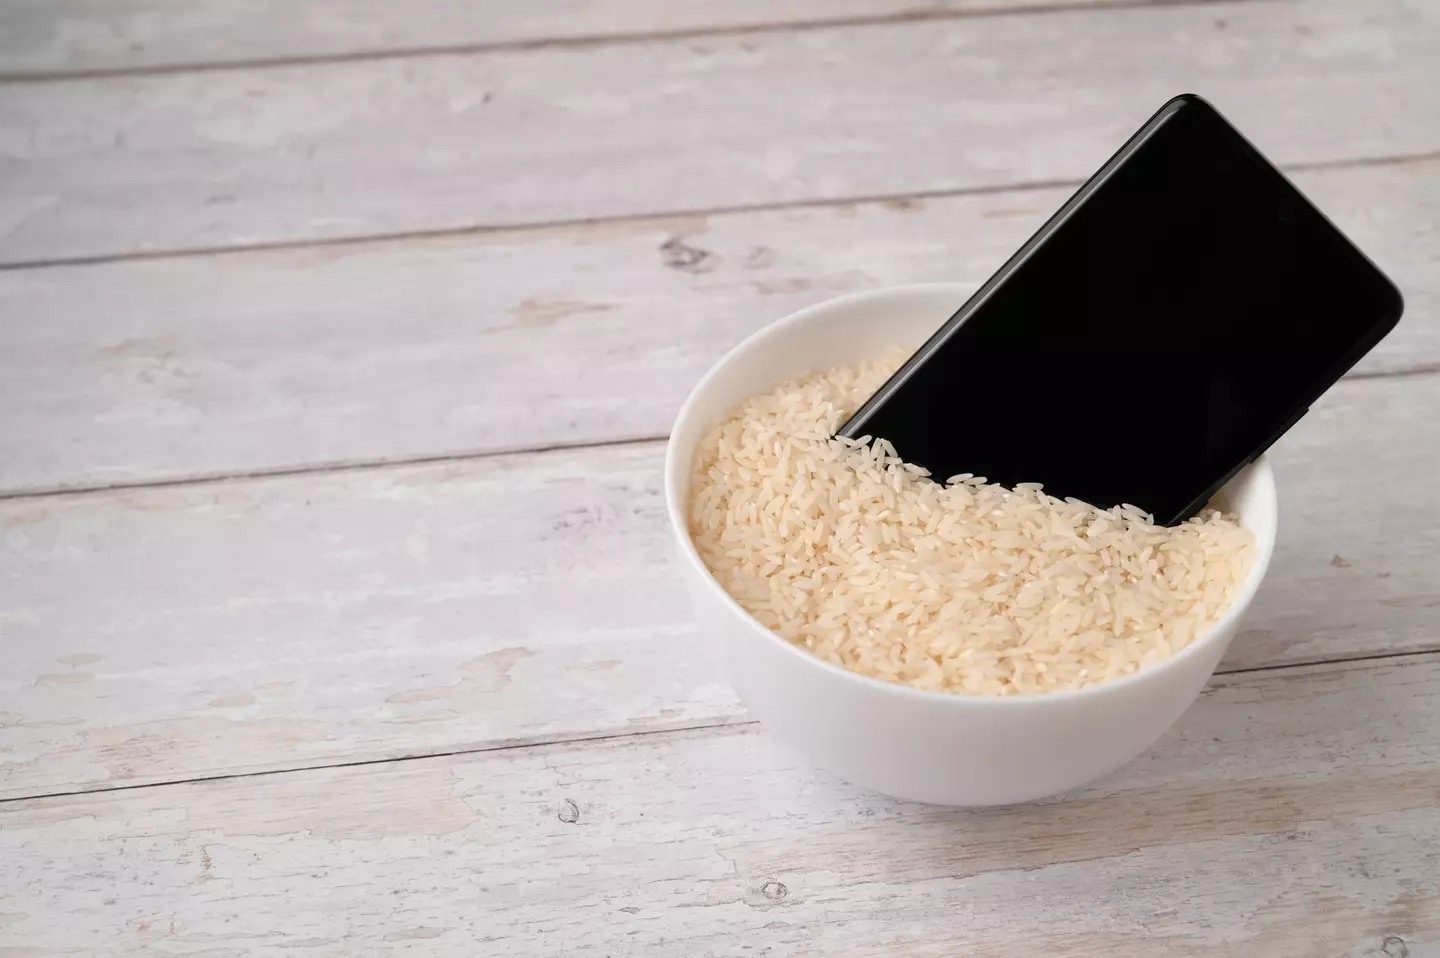 You shouldn't be putting your phone in rice.